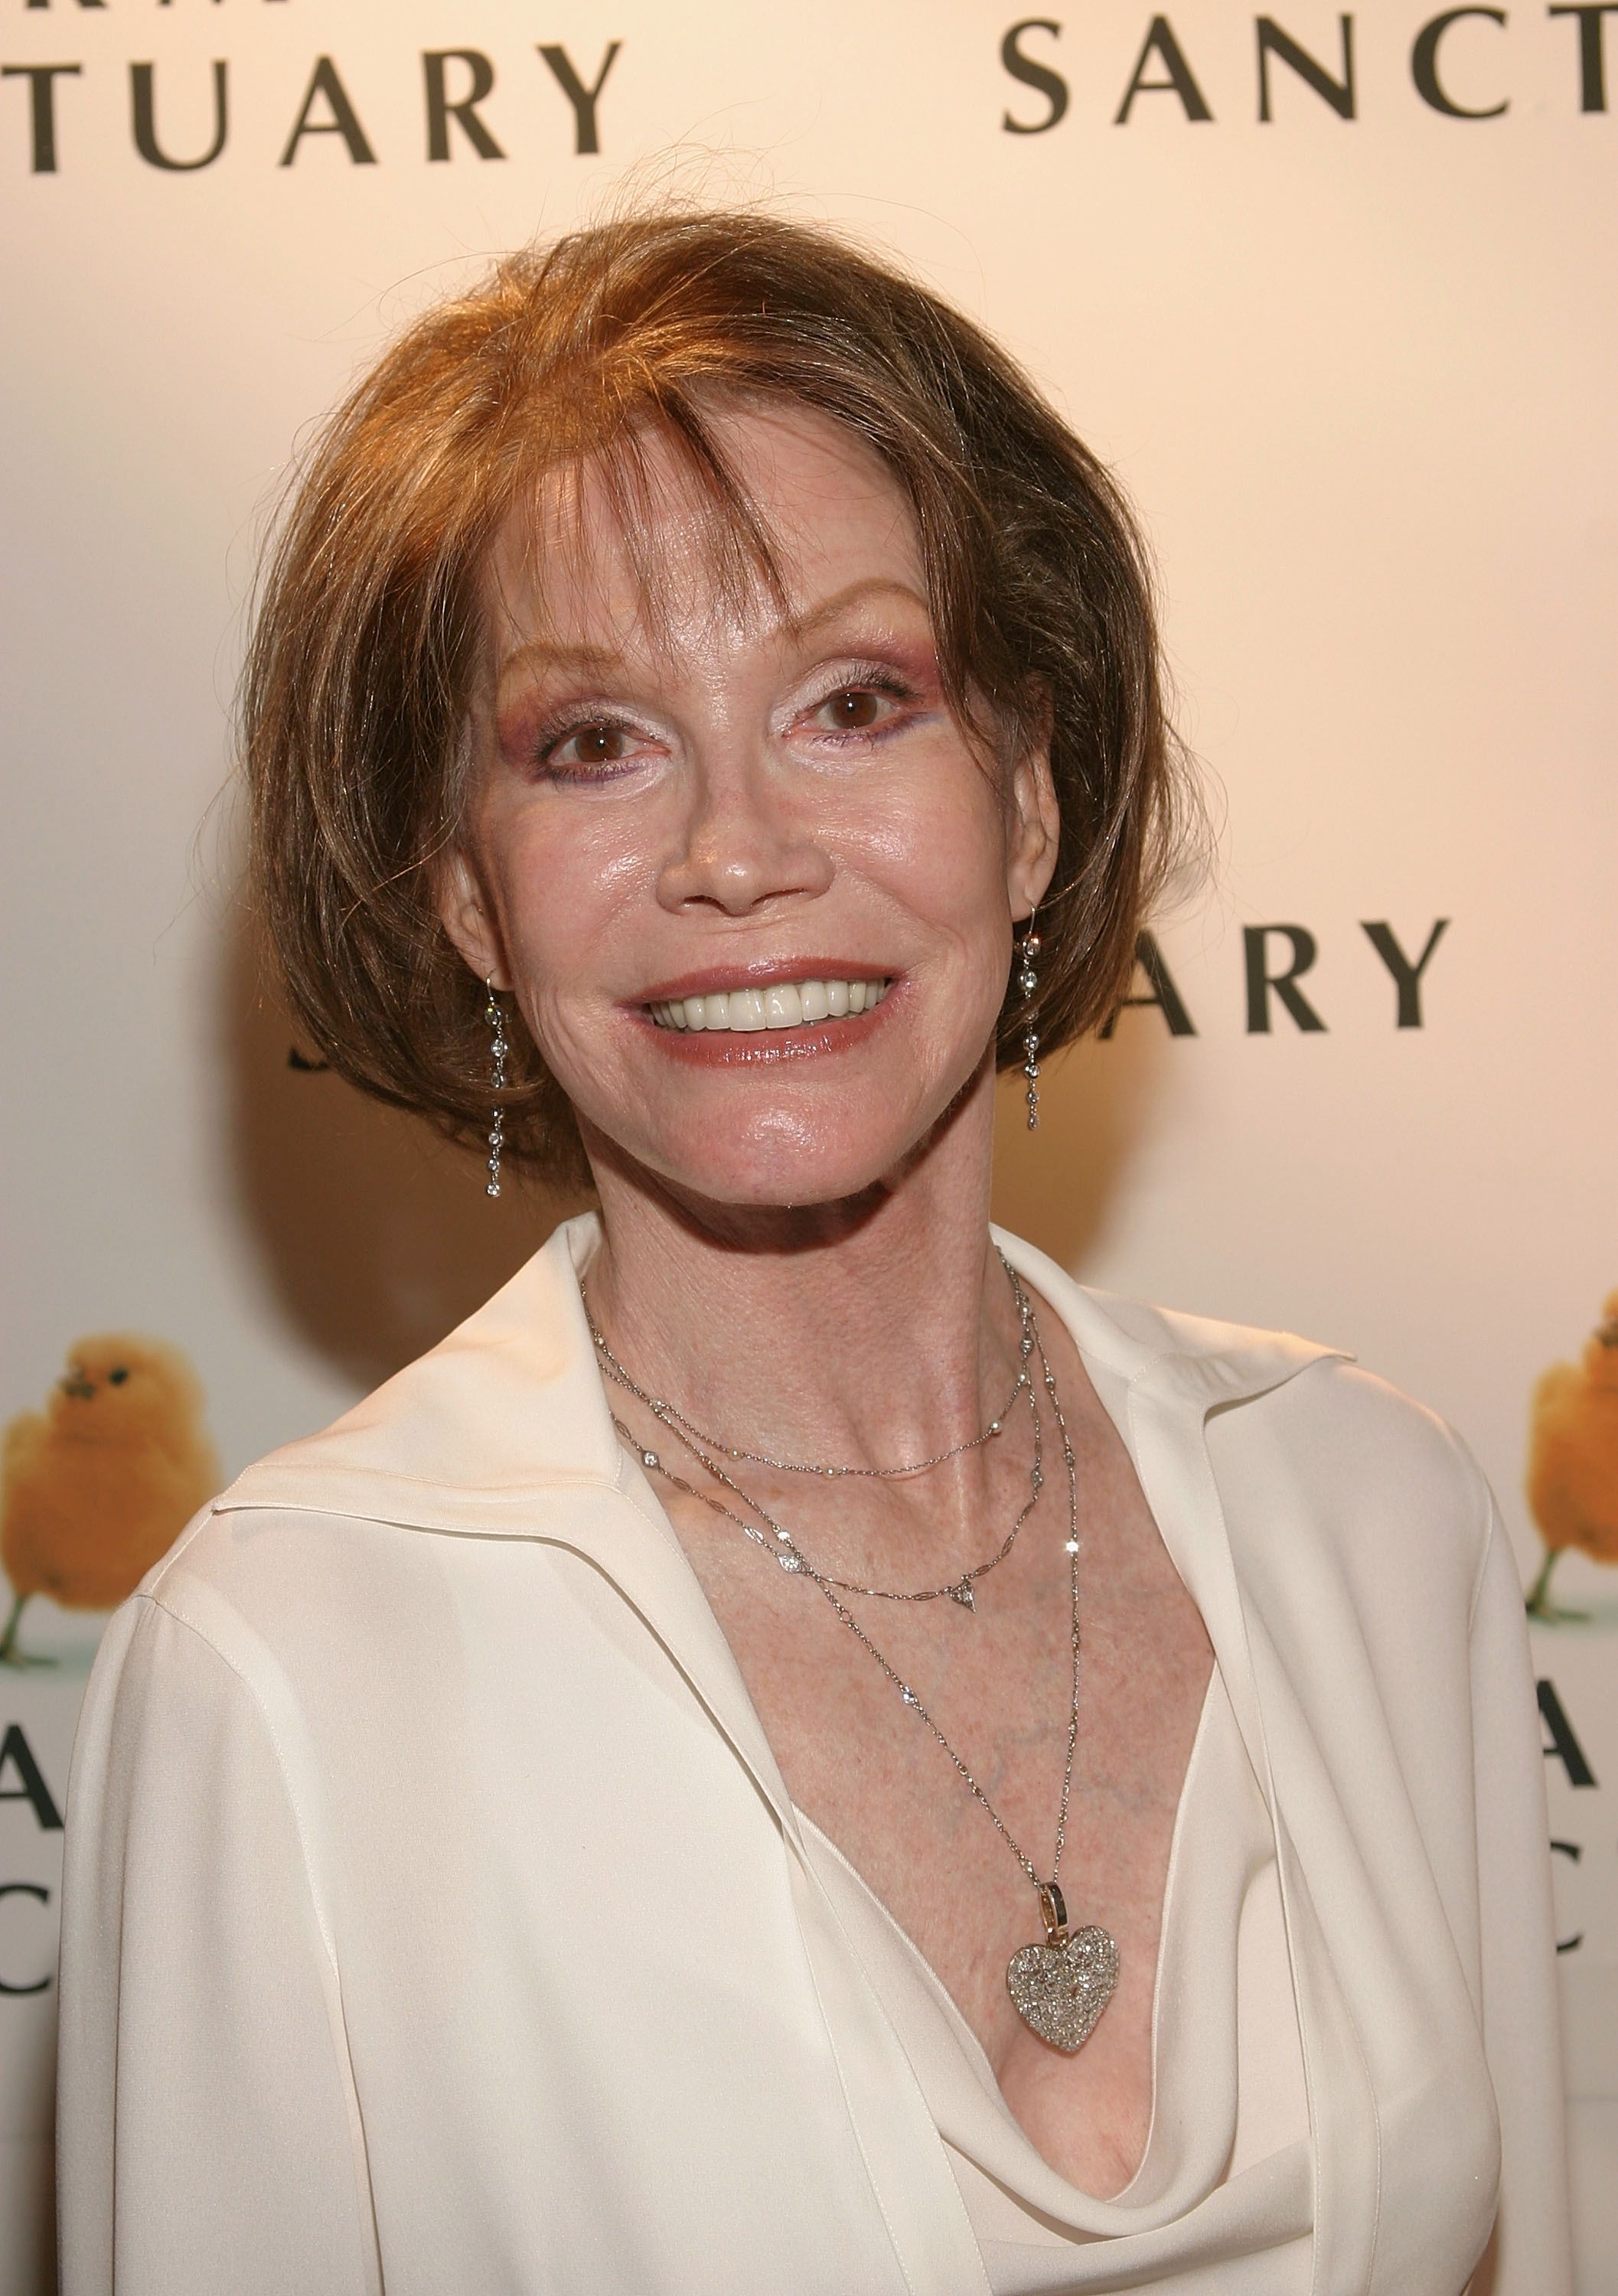 Mary Tyler Moore at the Farm Sanctuary Gala held at The Plaza Hotel on May 22, 2004, in New York City | Photo: Thos Robinson/Getty Images